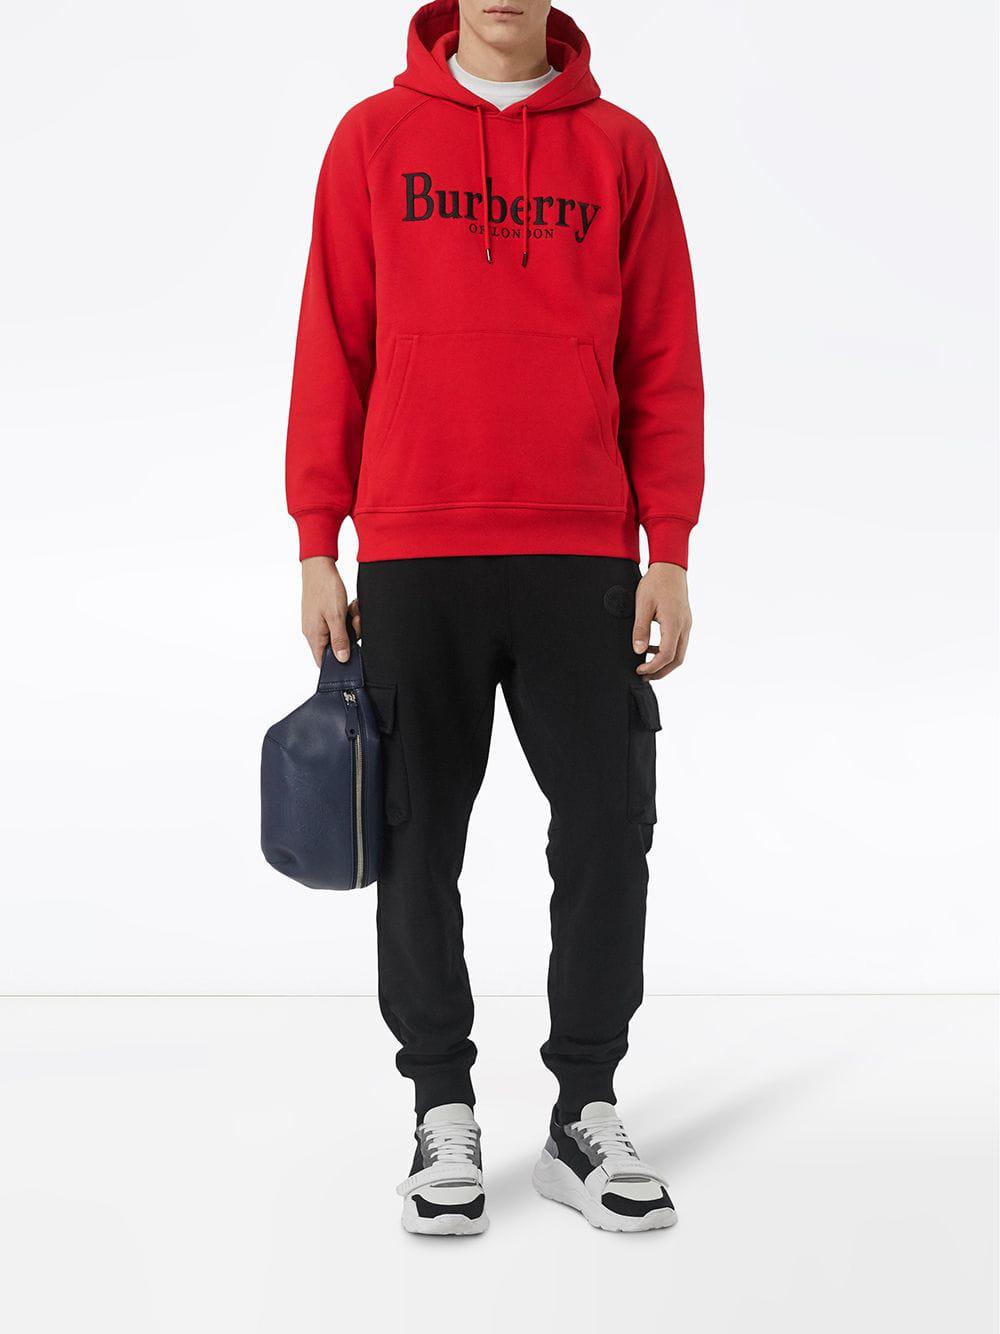 Burberry Cotton Logo Hoodie in Bright Red (Red) for Men | Lyst